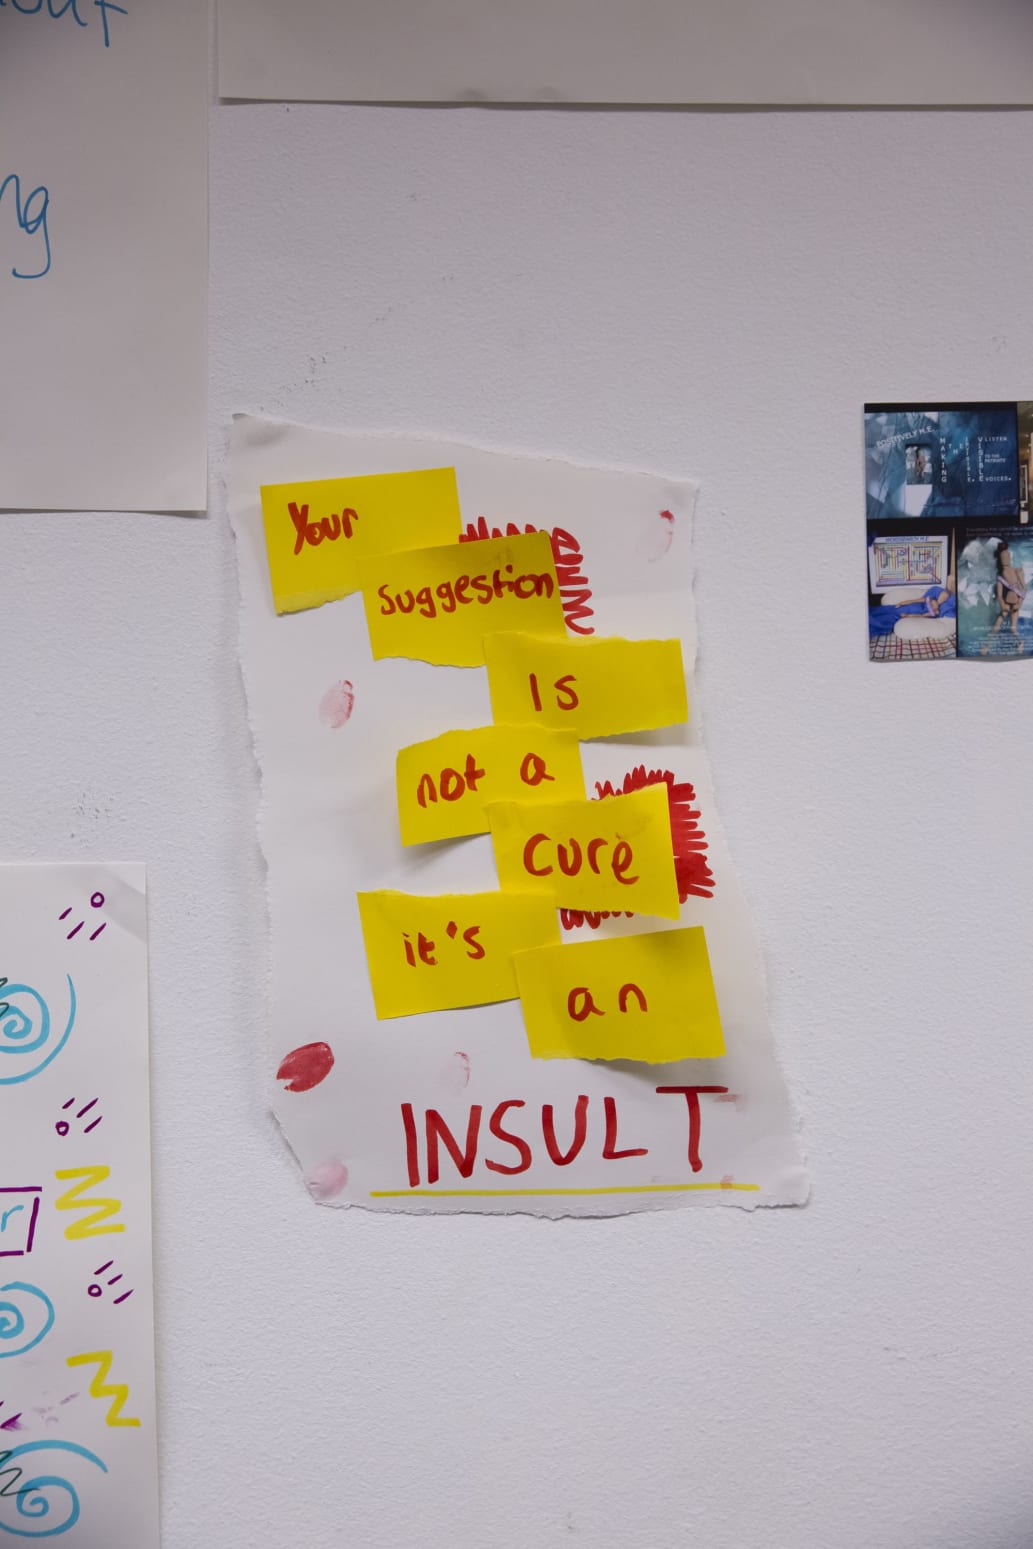 A photograph of a poster created in a workshop using paper, sticky notes, and felt tip pens. Across seven yellow post-it notes stuck to a sheet of white paper, text - written in red felt pen - reads: 